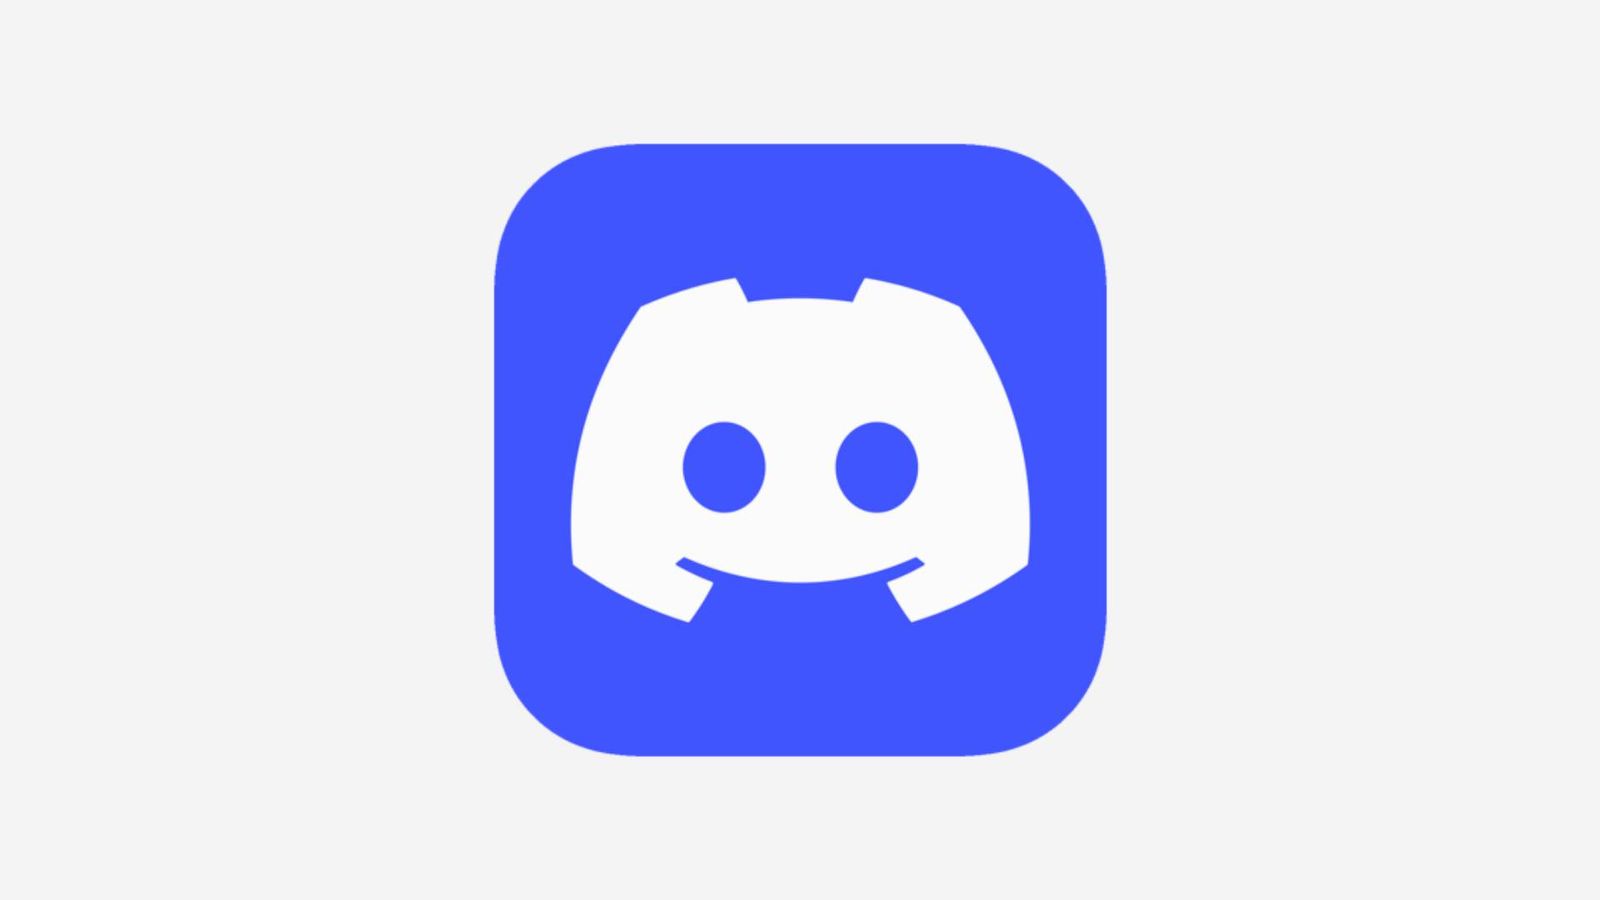 Discord stuck on checking for updates - An image of the Discord logo